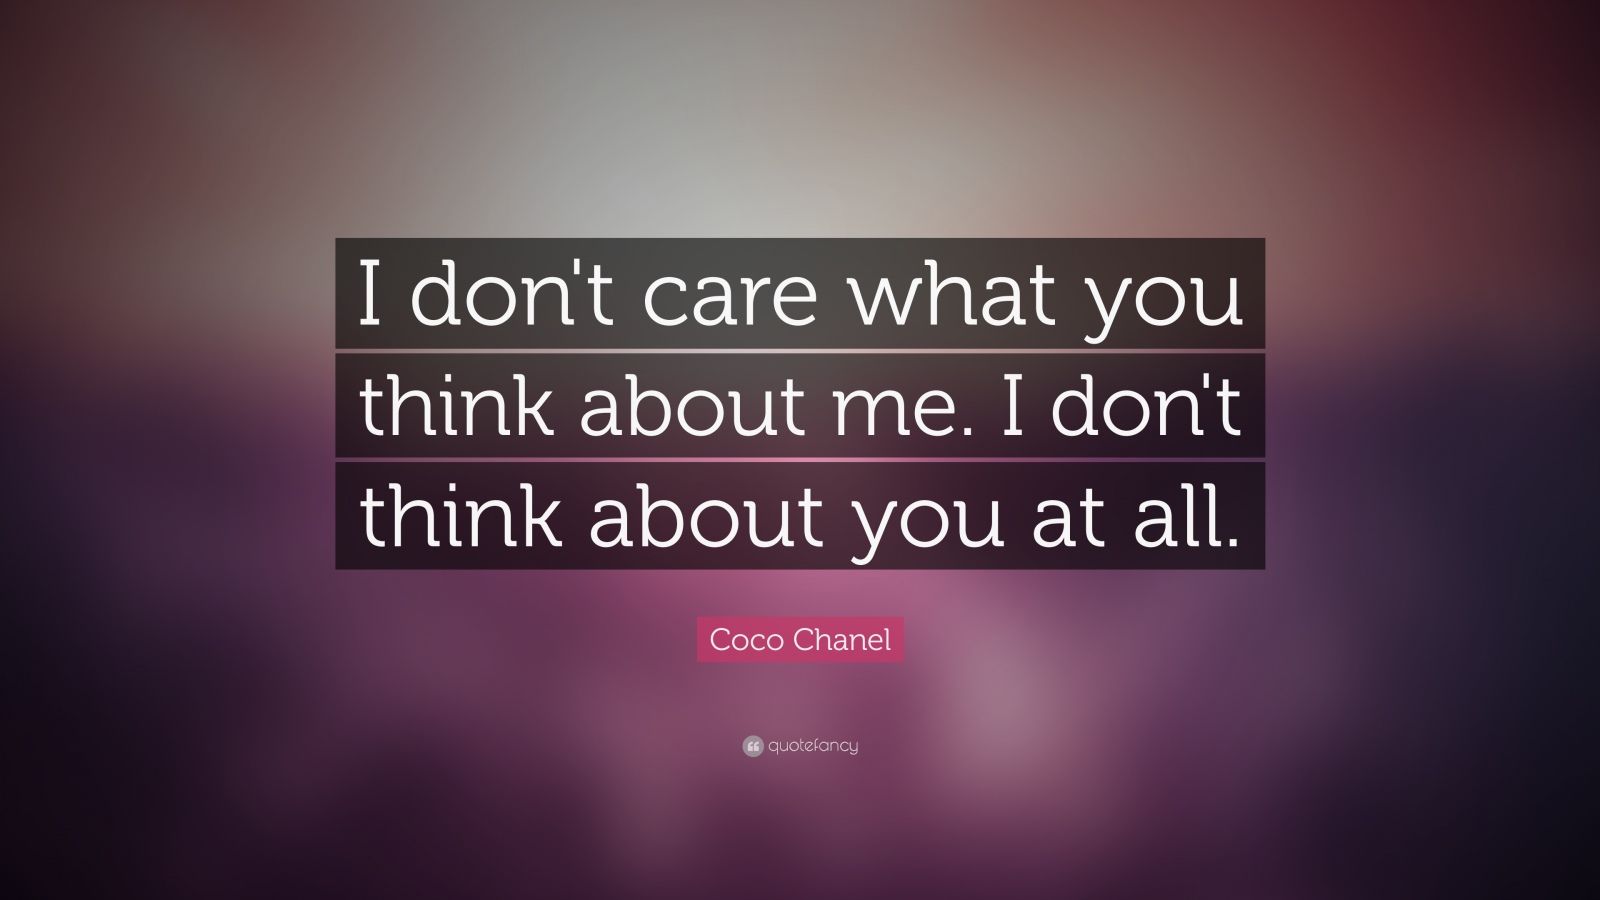 Coco Chanel Quote: “I don't care what you think about me. I don't think